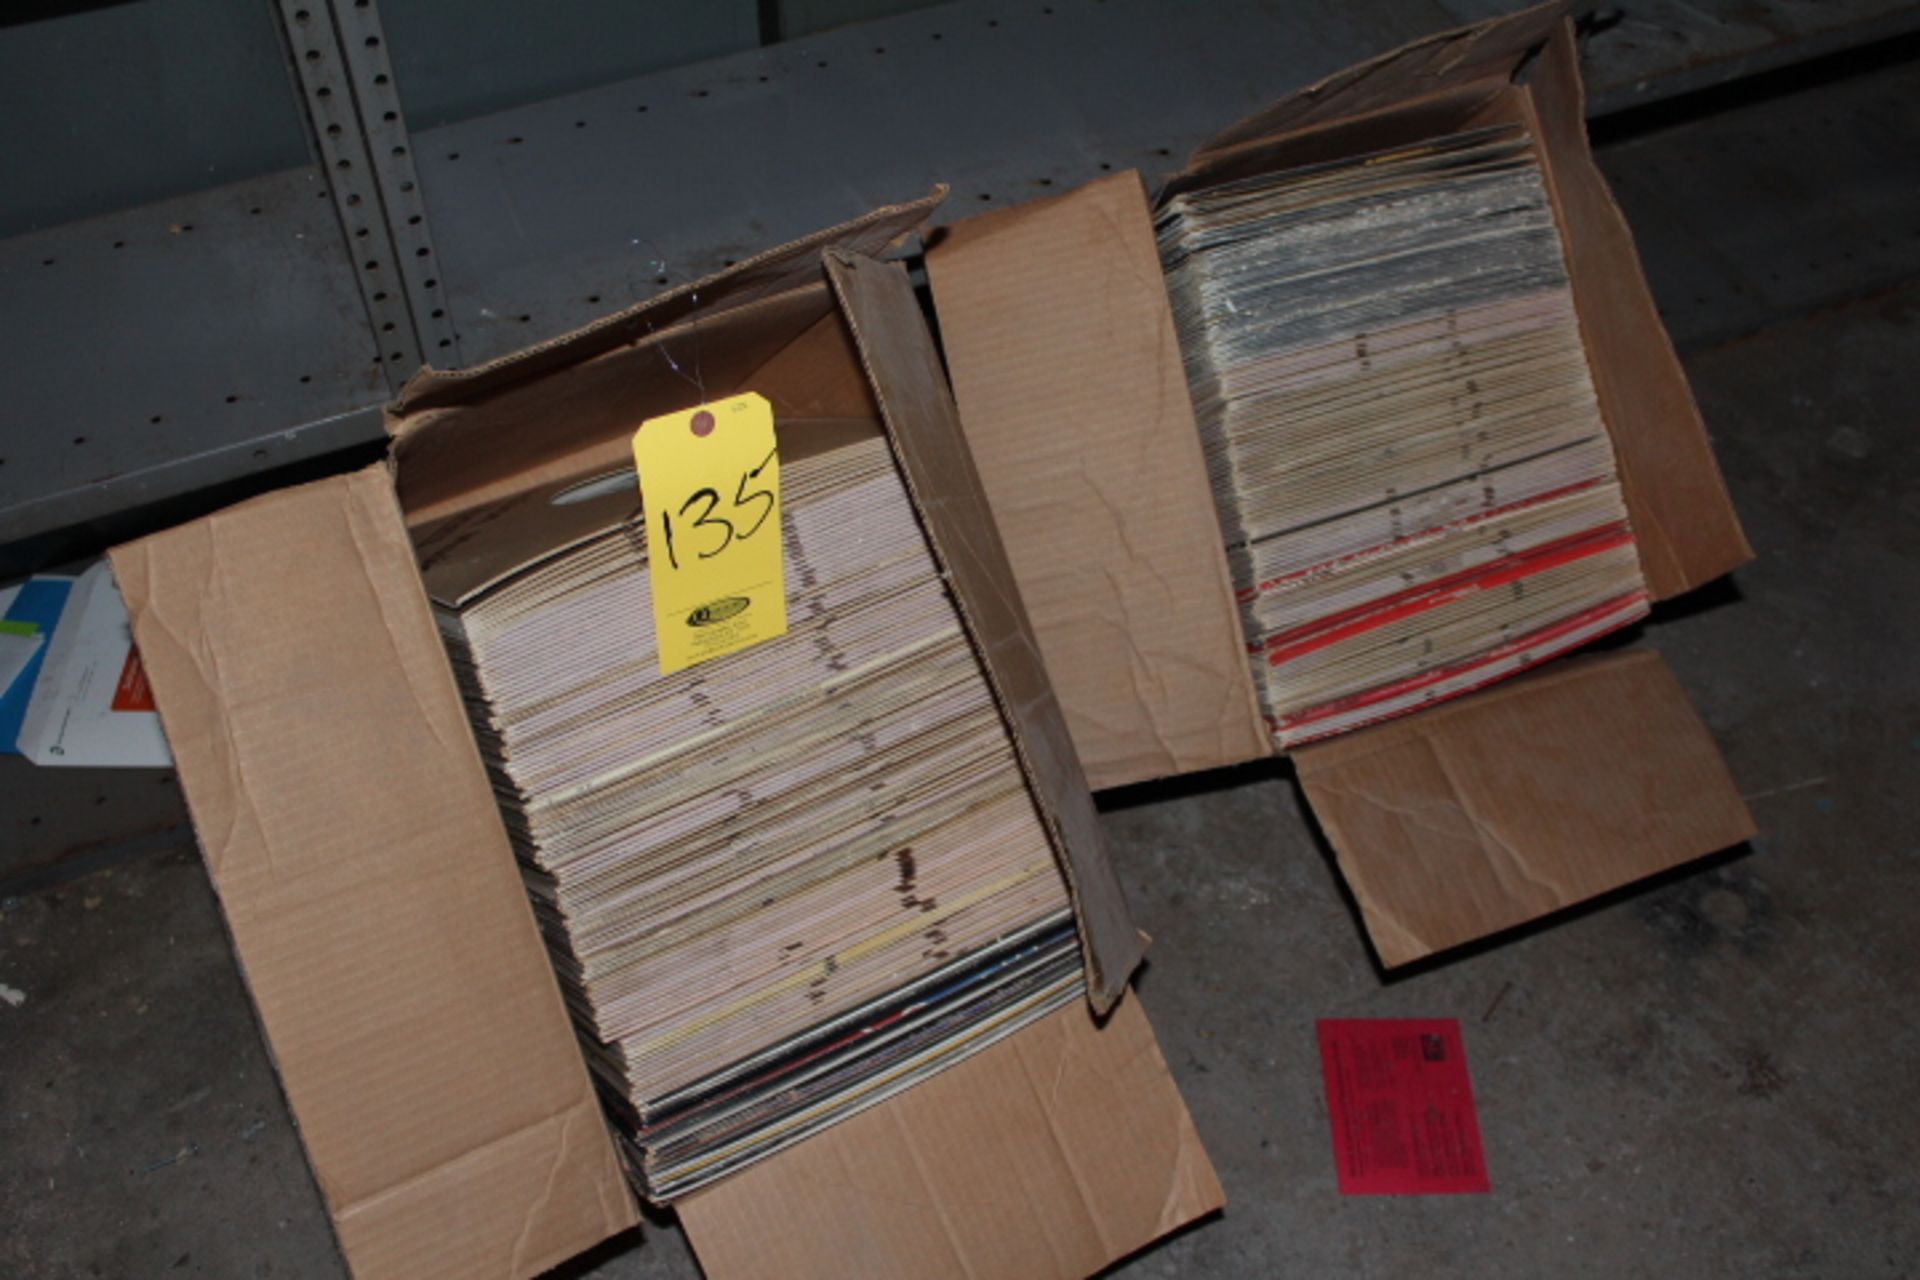 2-BOXES RECORDS